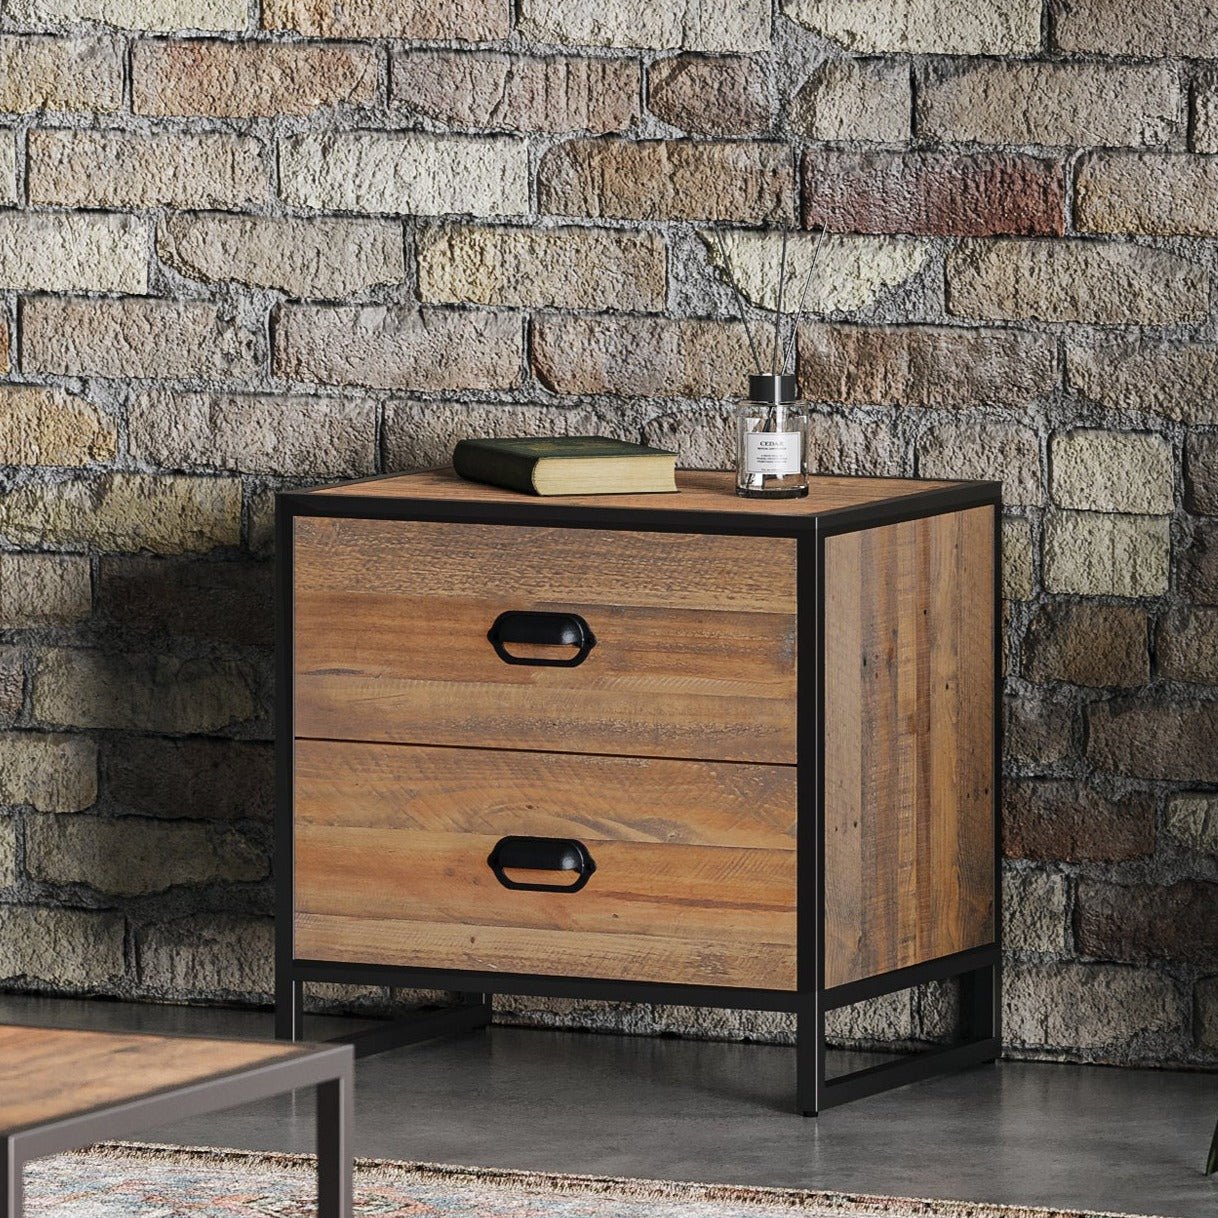 Ooki Modular Low Chest of Drawers - Duck Barn Interiors